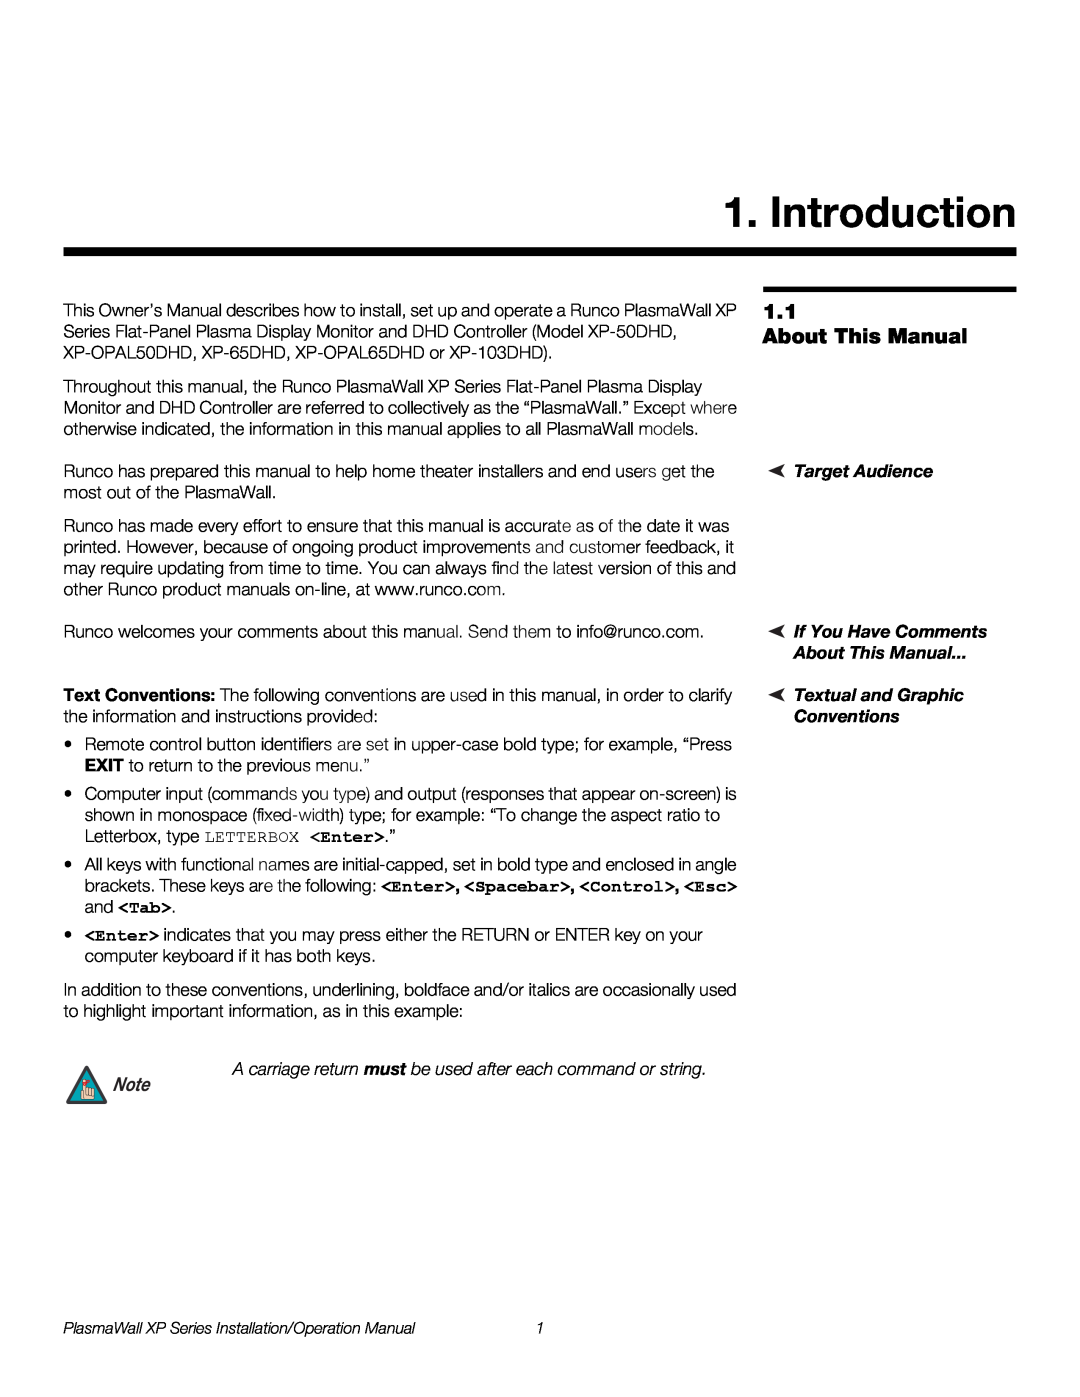 Runco XP-103DHD Introduction, About This Manual, Target Audience, If You Have Comments, Textual and Graphic, Conventions 